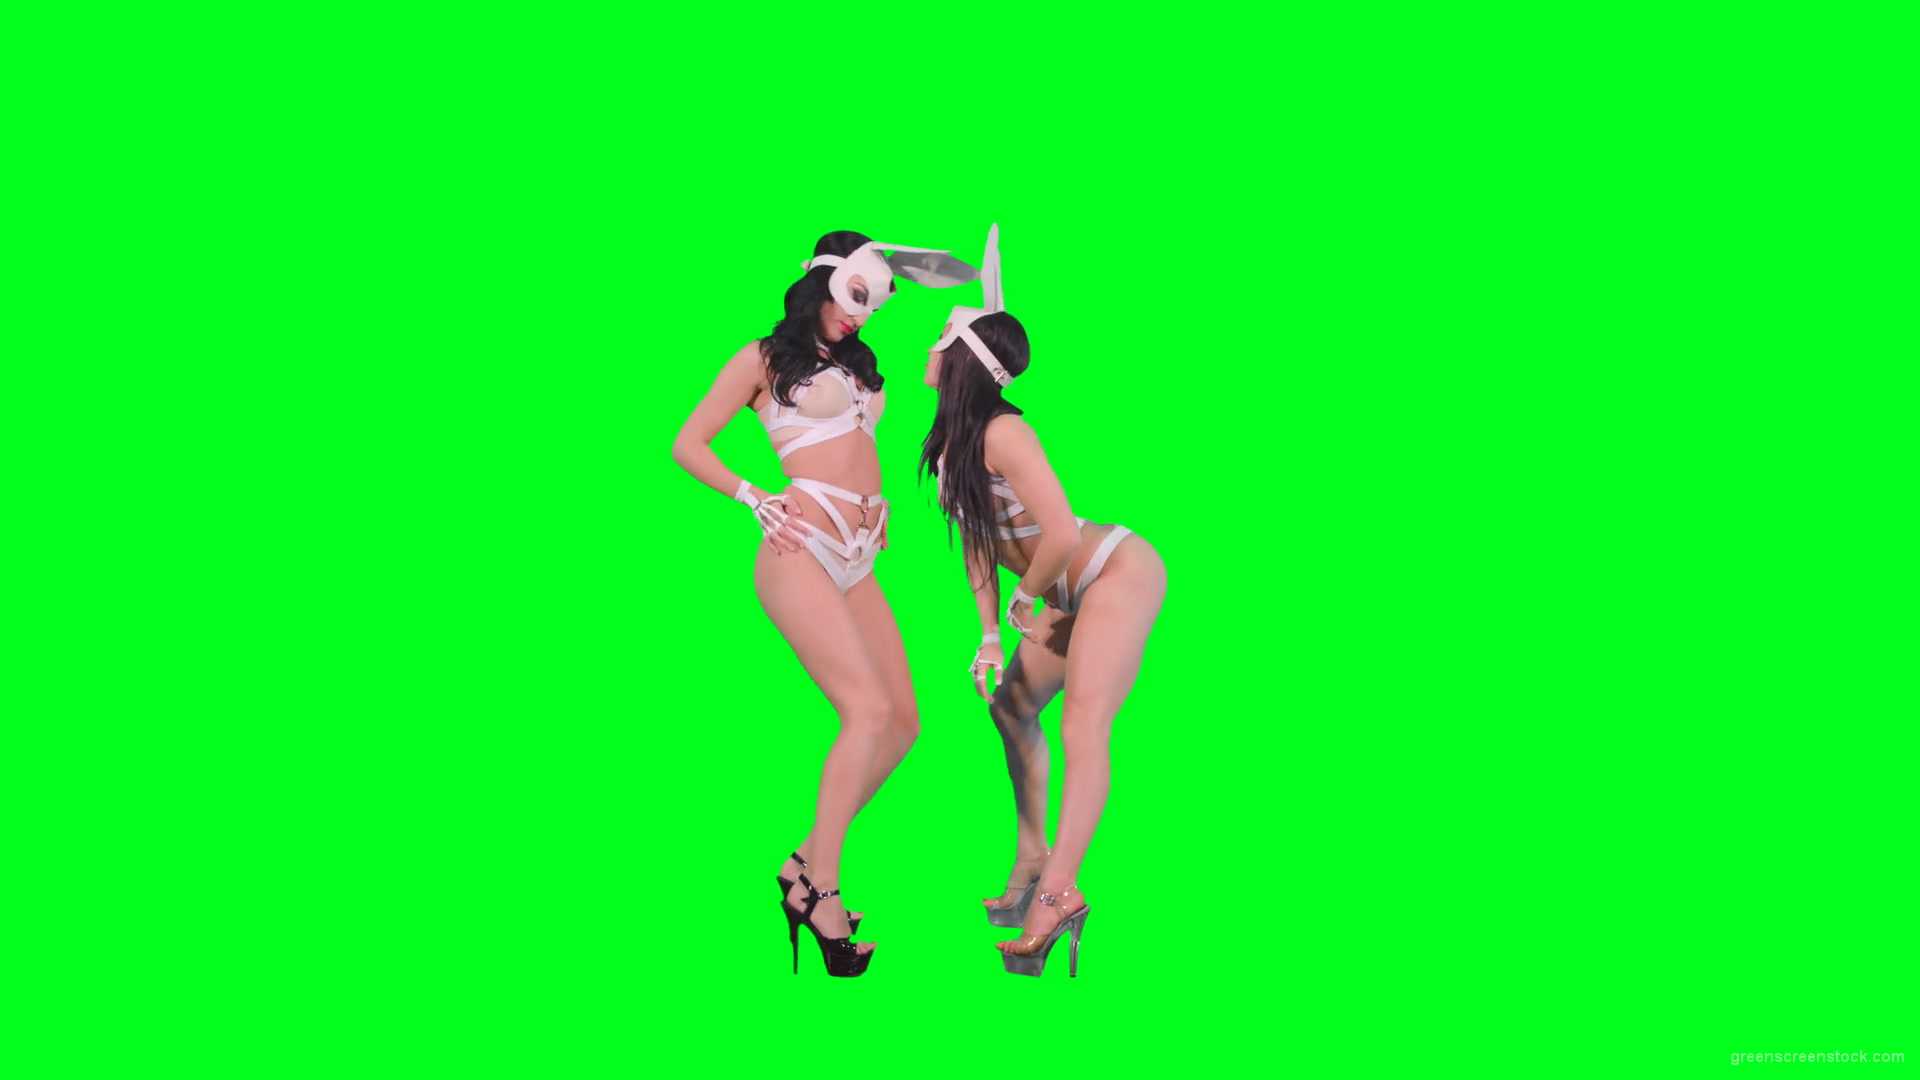 Light-erotic-girls-in-rabbit-playboy-costumes-on-green-screen-moving-sexy-4K-Video-Footage-1920_005 Green Screen Stock